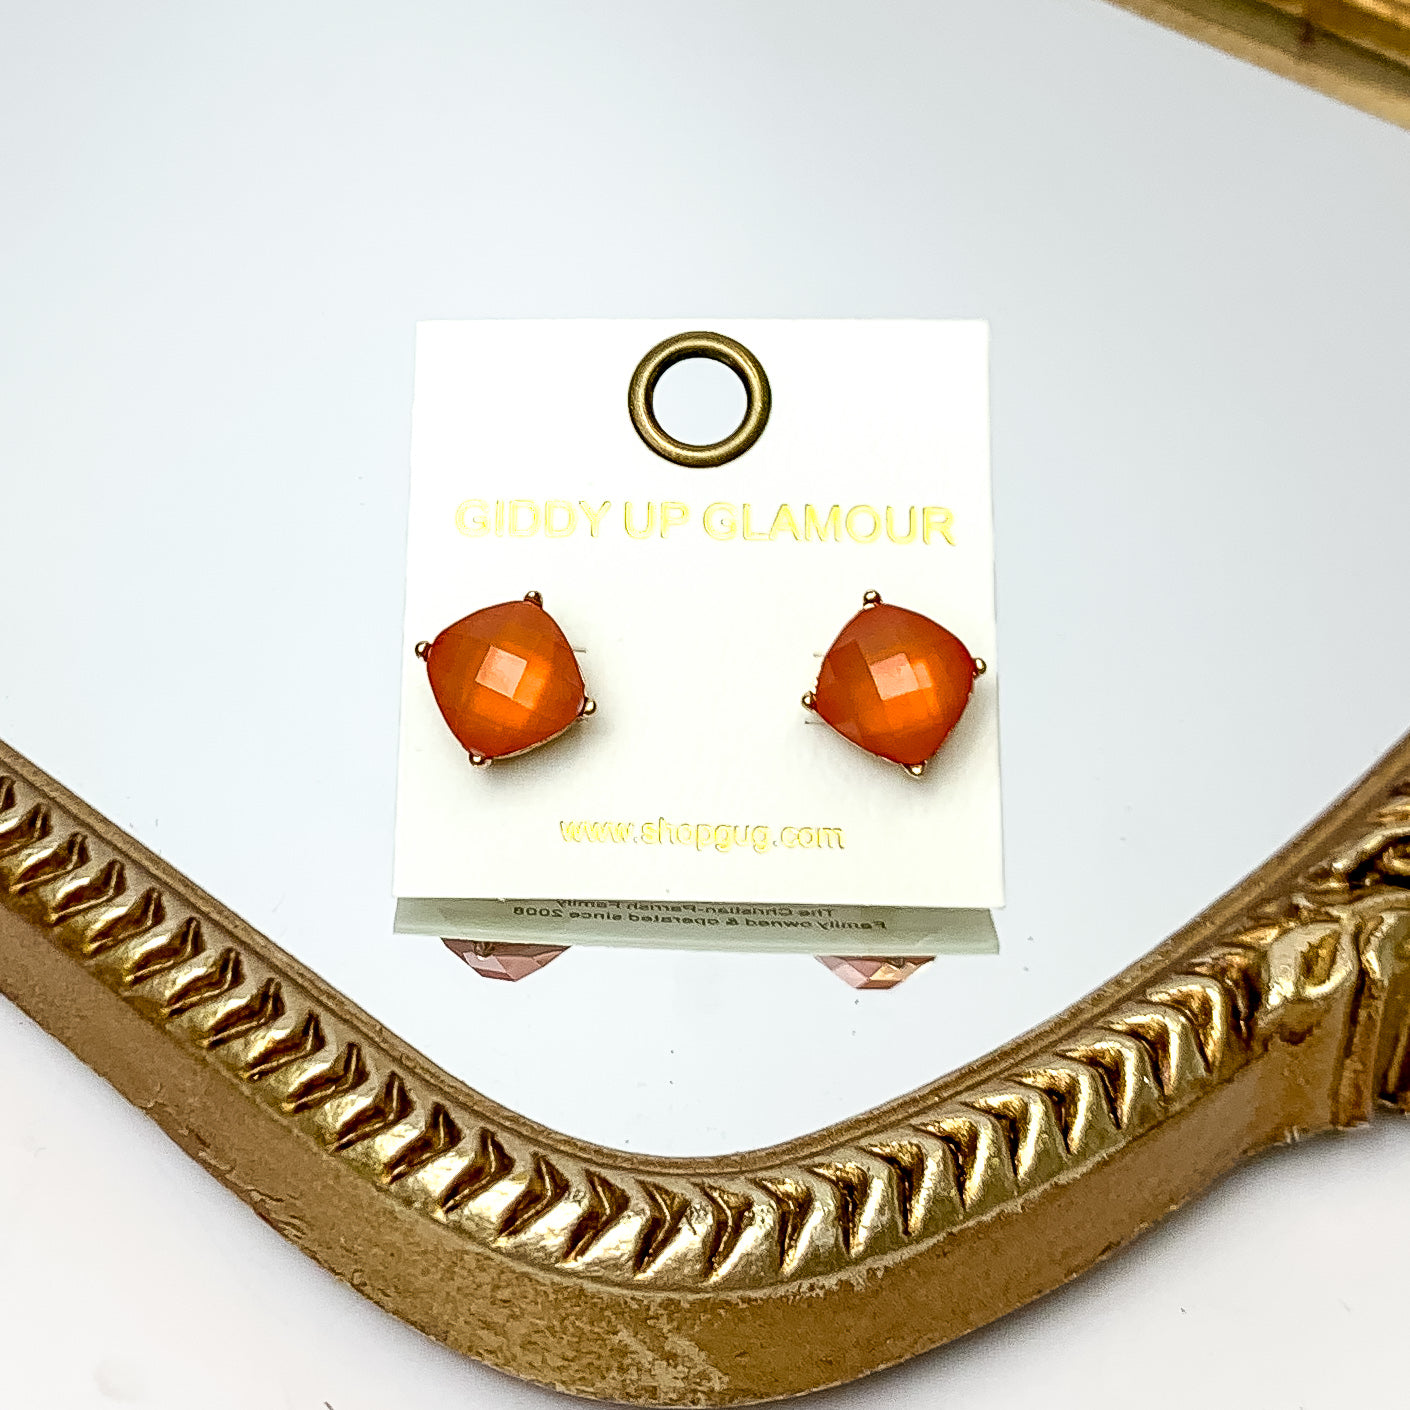 Large Crystal Stud Earrings in Orange. These earrings are pictured laying on a gold trimmed mirror.